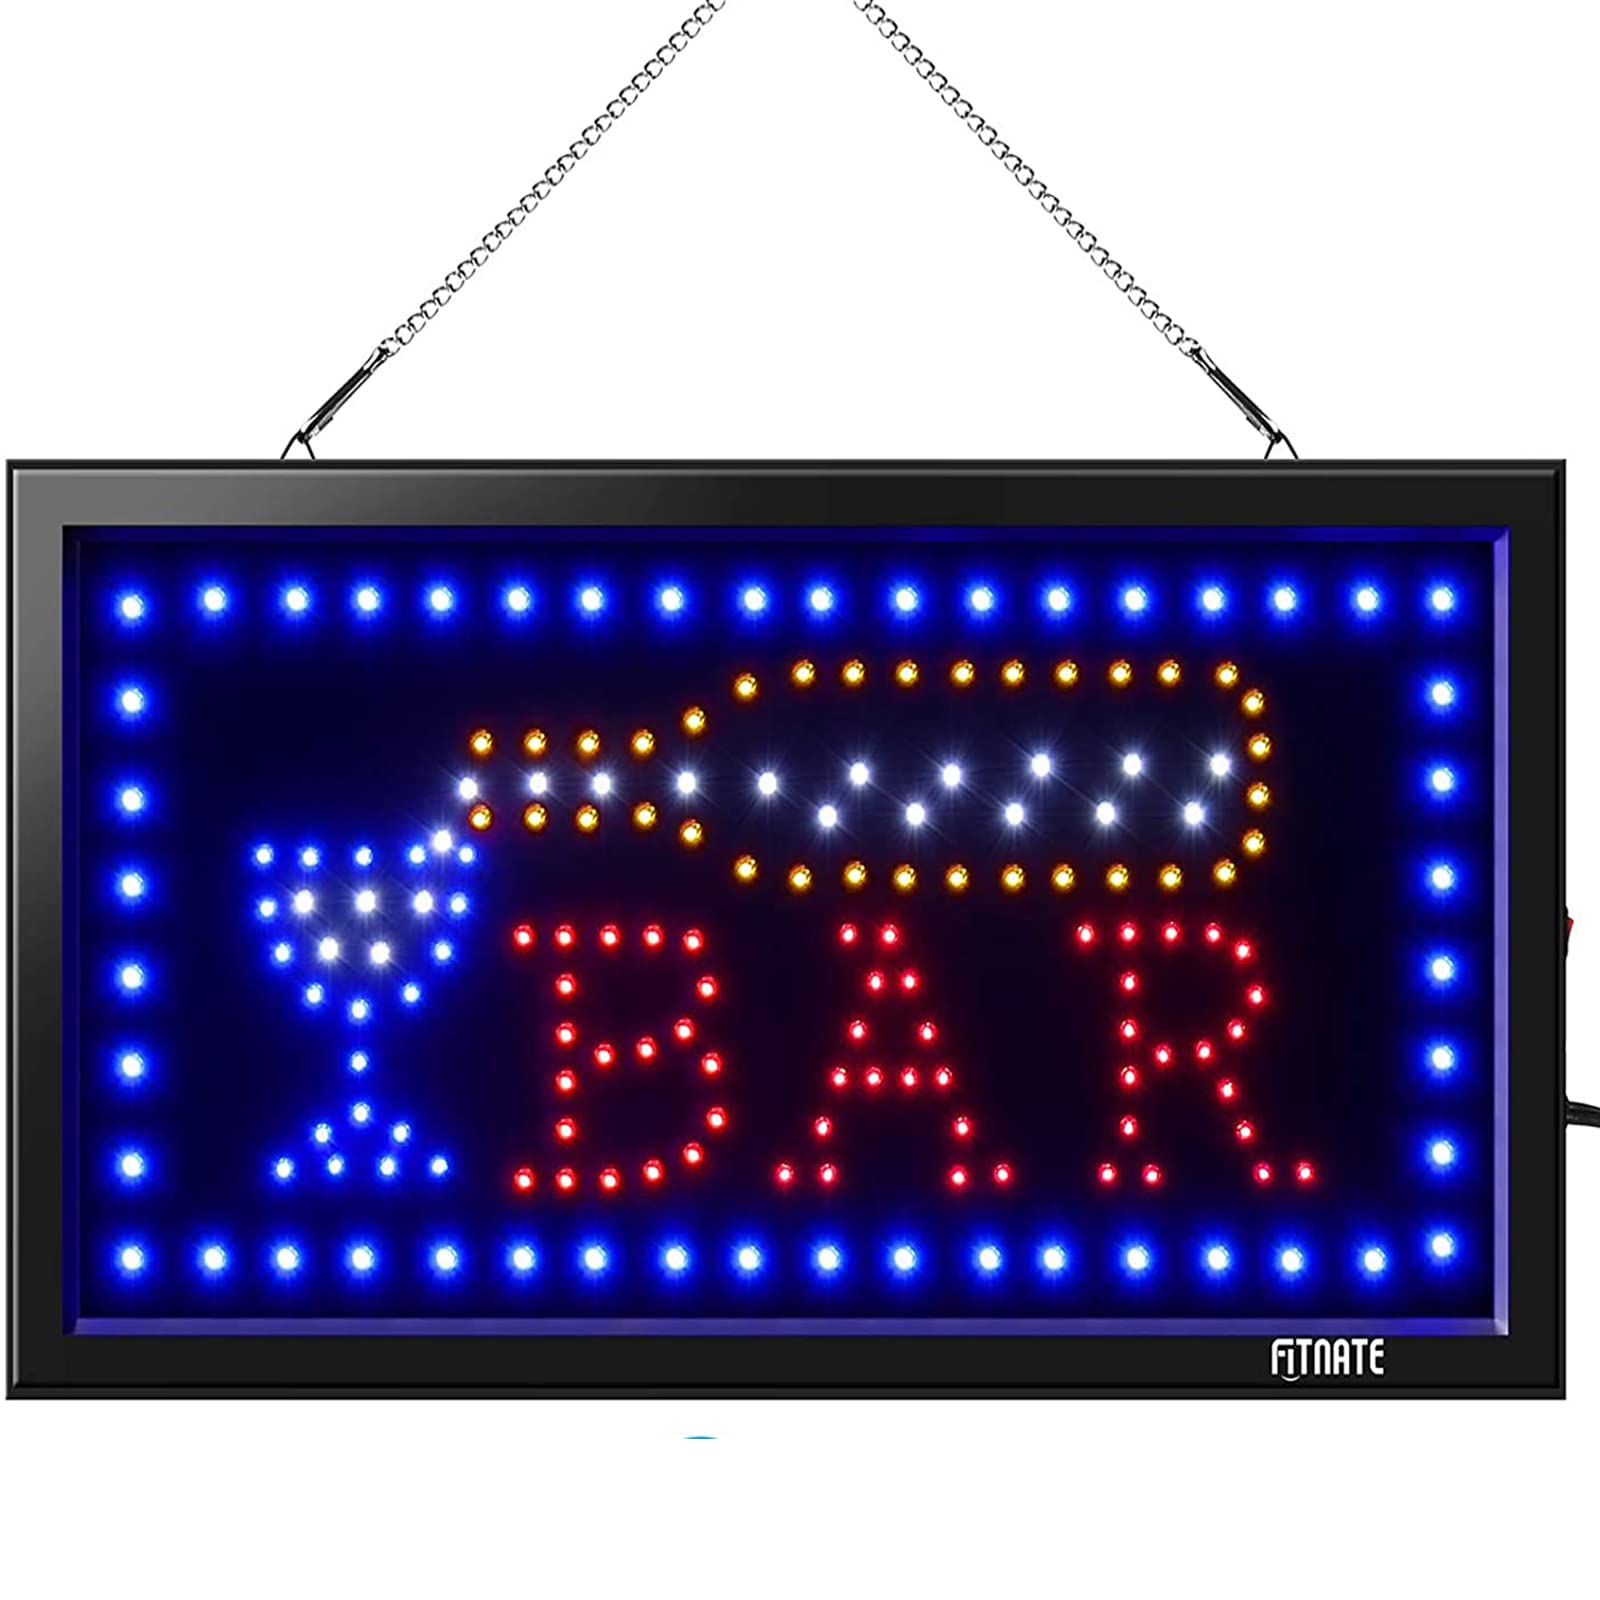 Fitnate LED BAR Sign,48.5x25.5Cm Business BAR Sign Advertisement Board Electric Display Sign,with 2 Modes Flashing & Steady Light for Bar,Business,Walls,Window,Shop,Hotel